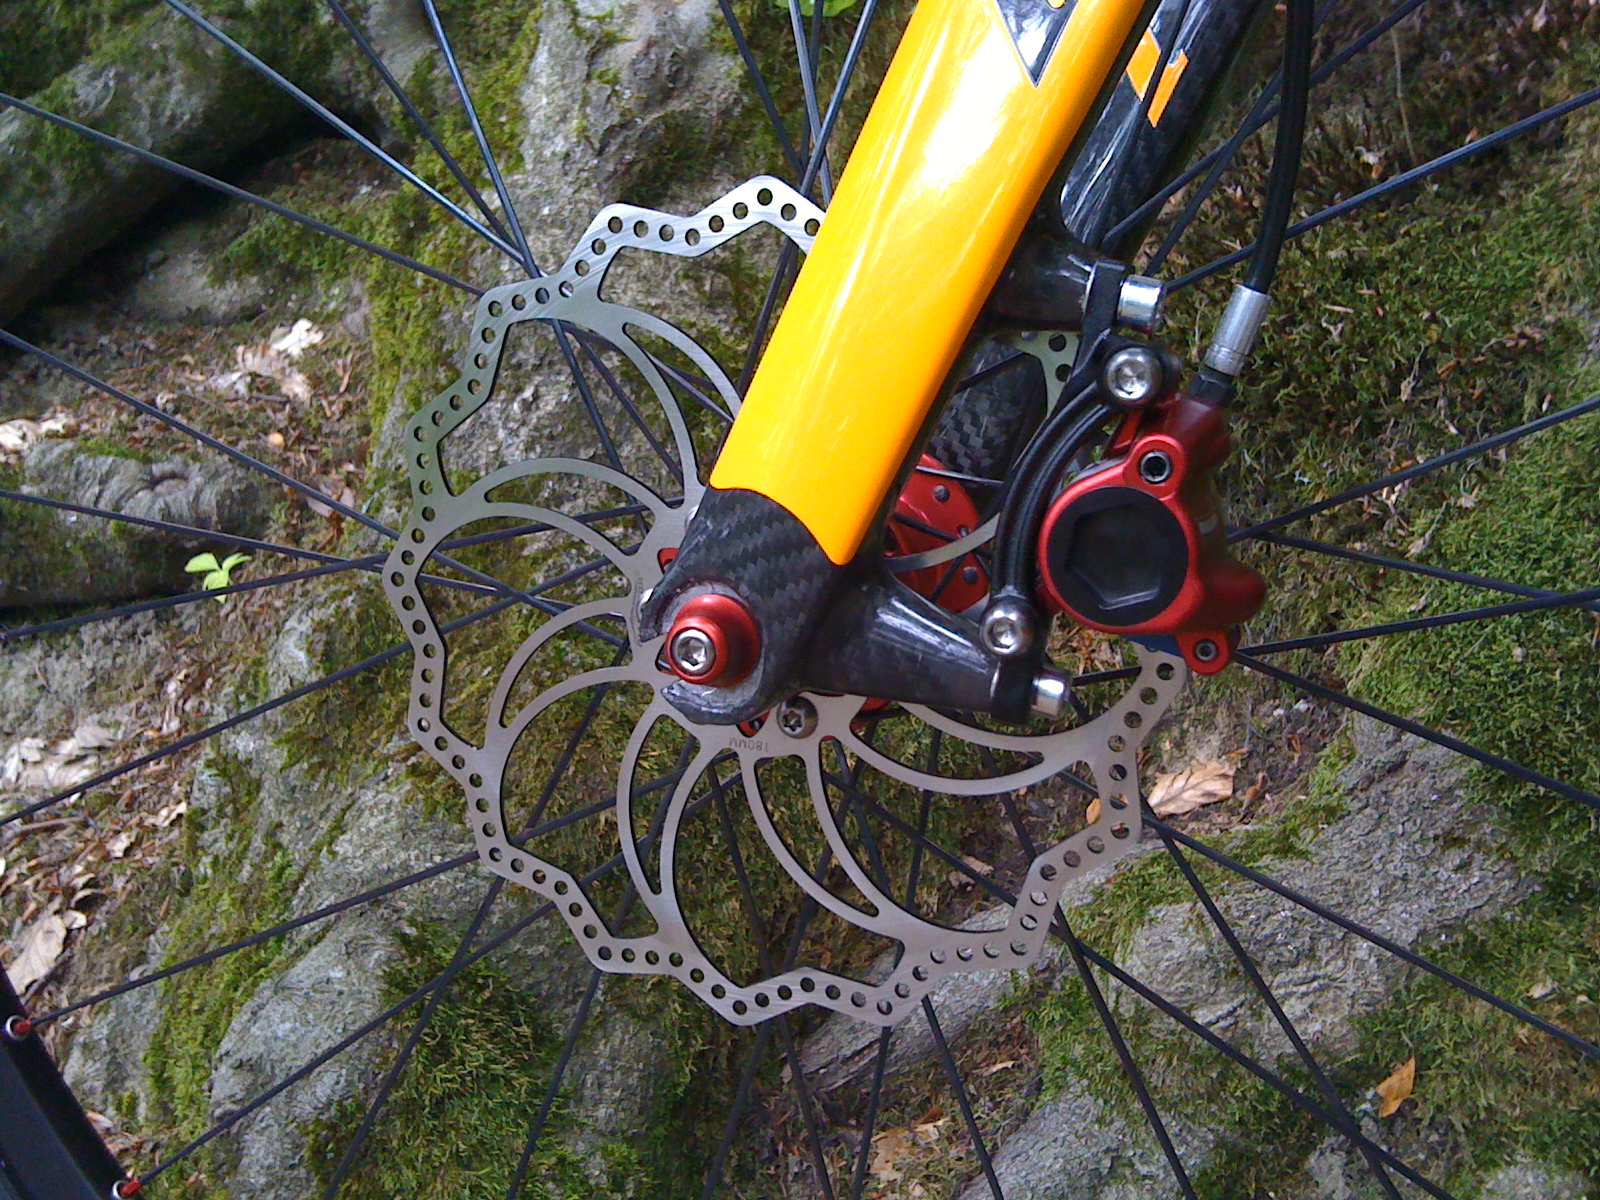 180mm rotor on Niner One9.